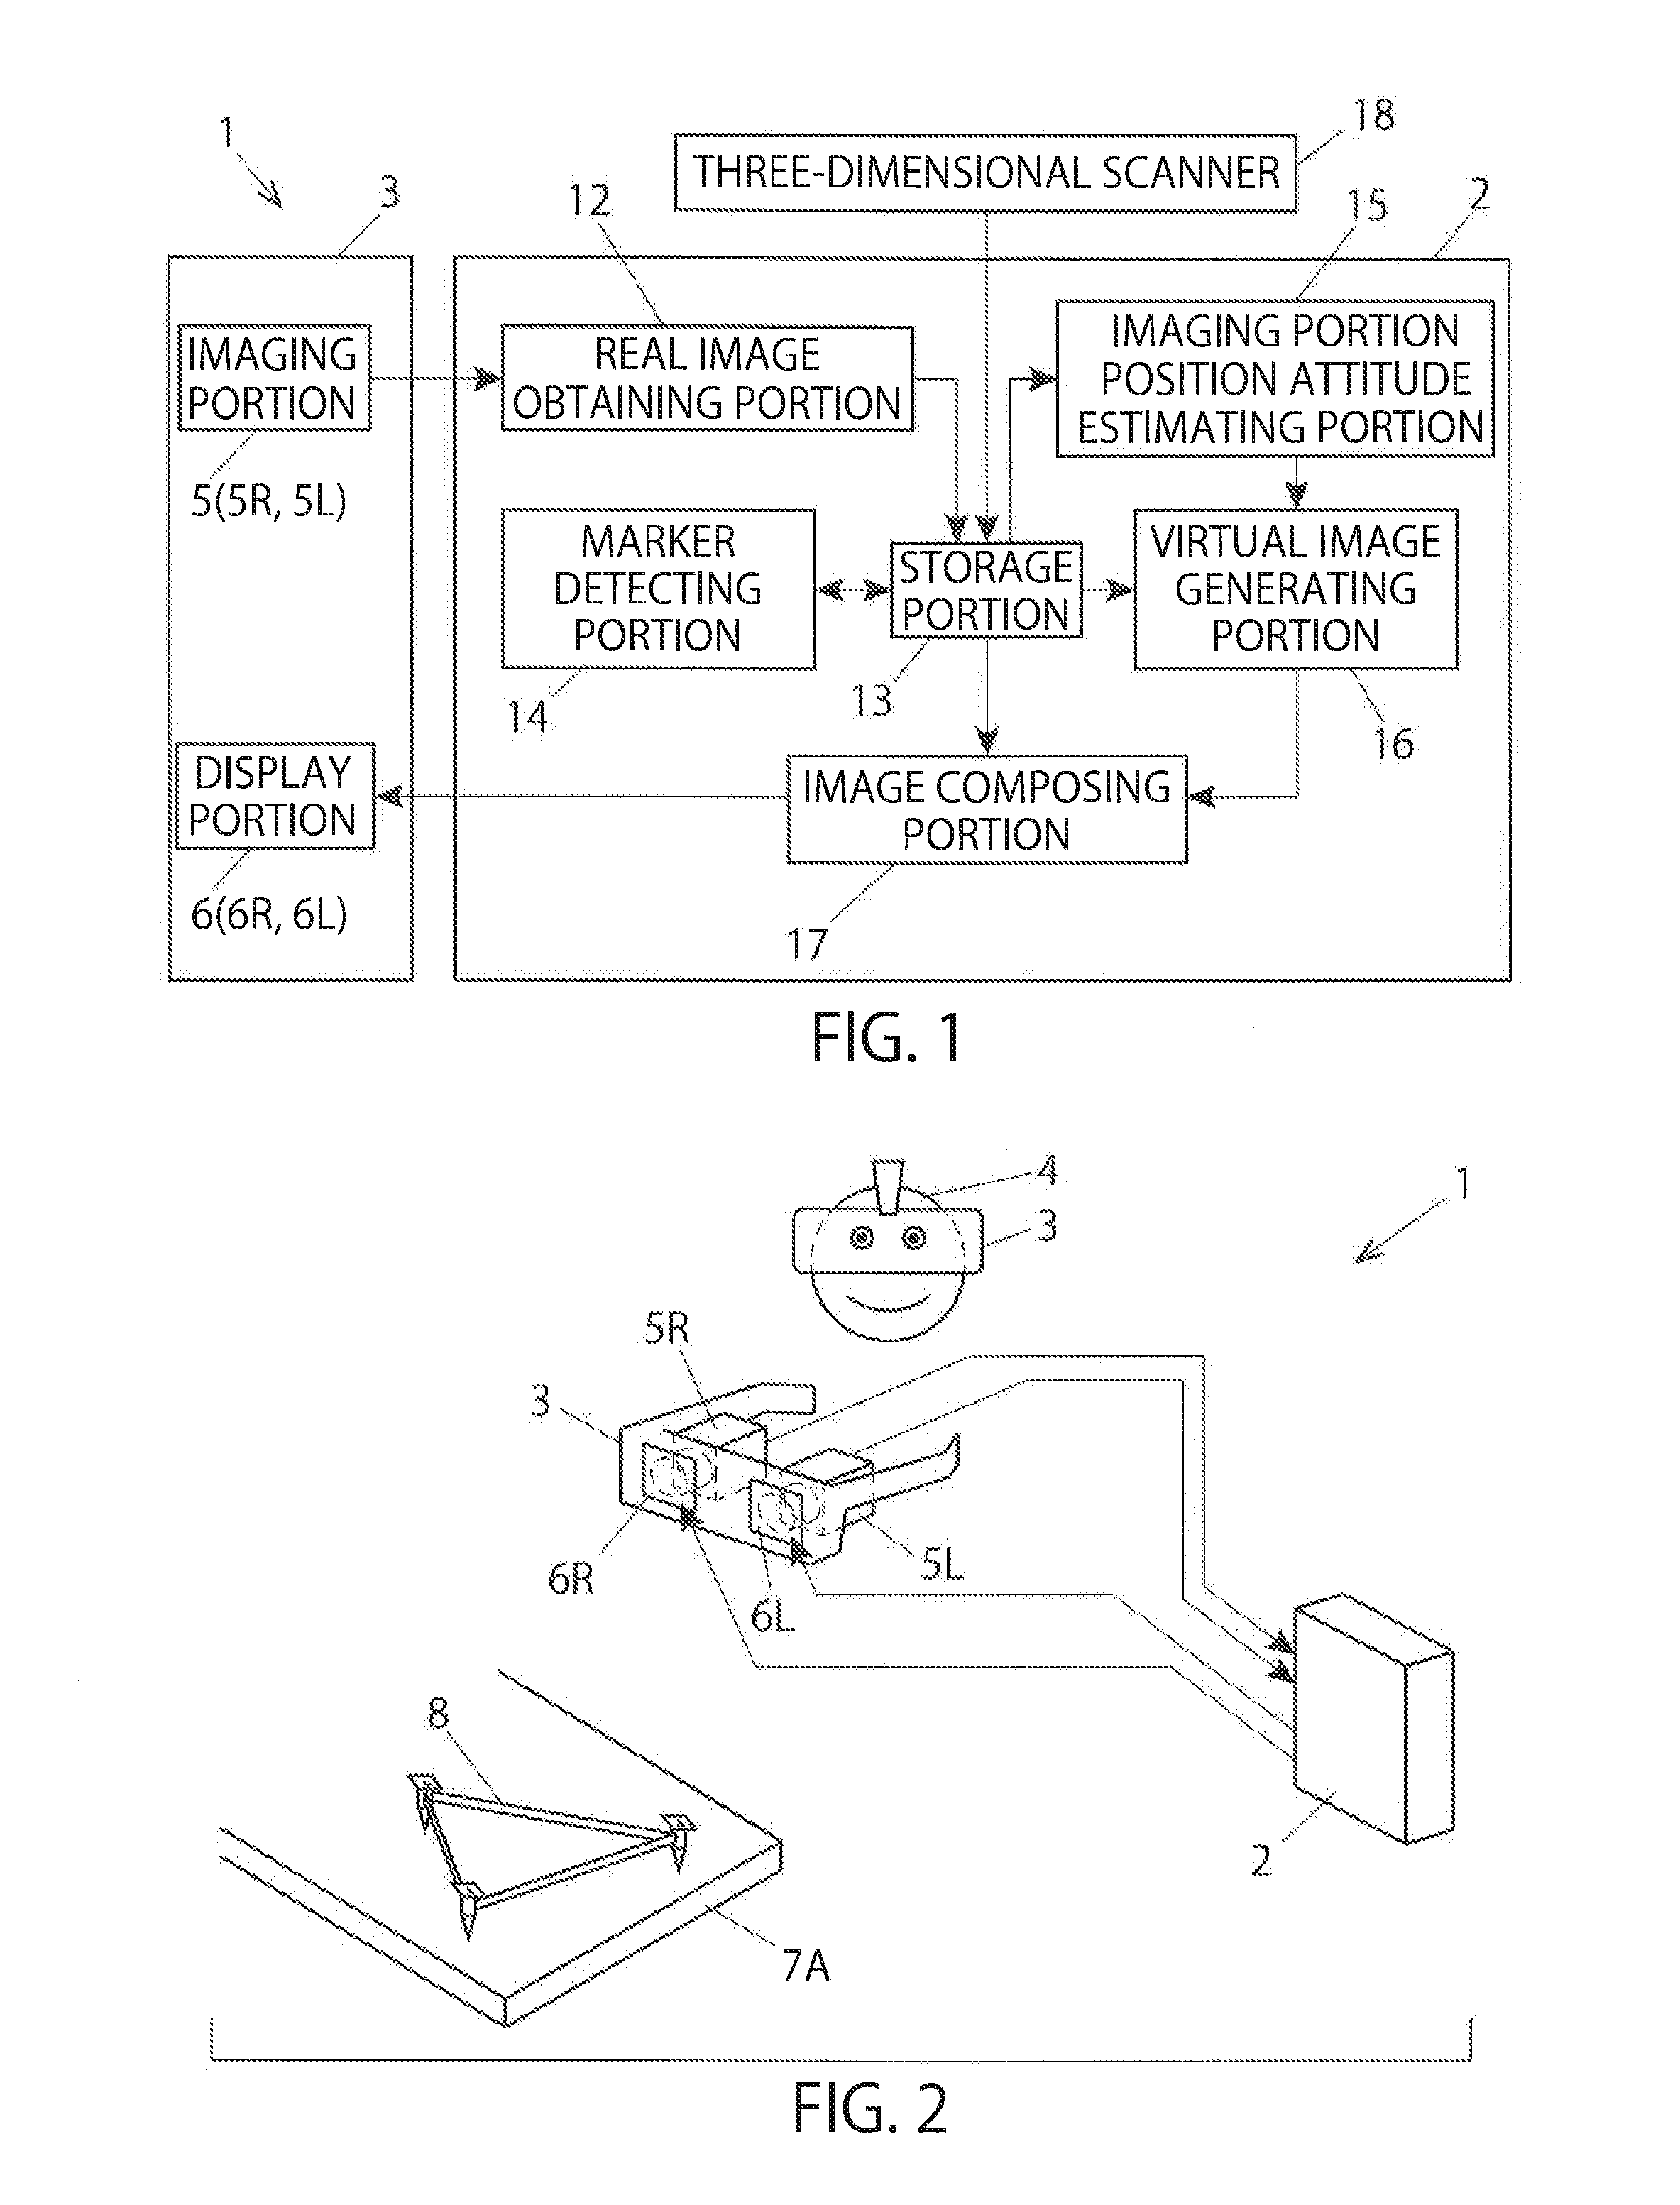 Component assembly work support system and component assembly method